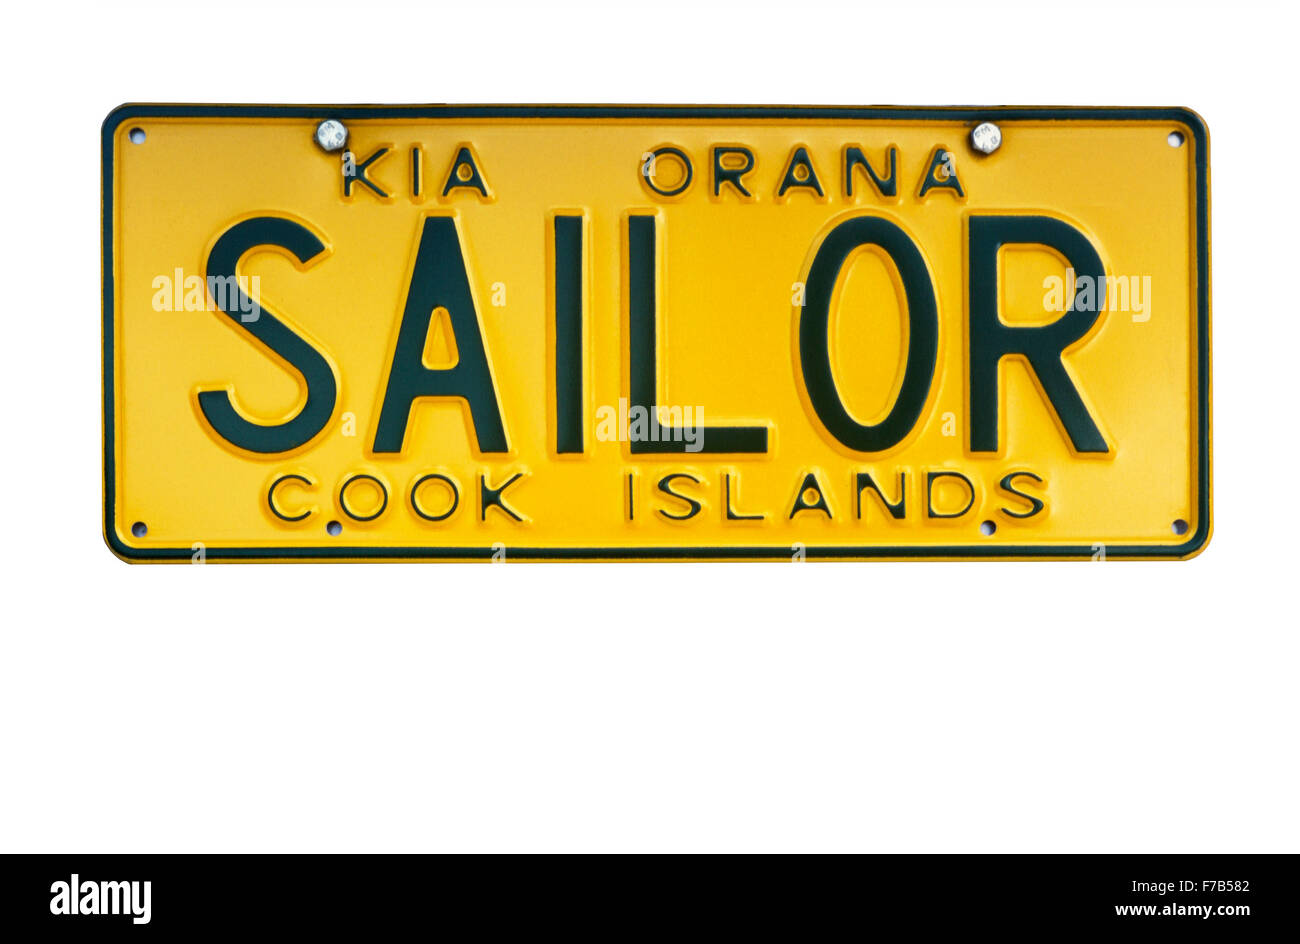 Cook Islands license plate with 'Kia Orana' a greeting in Maori language and license word sailor Stock Photo